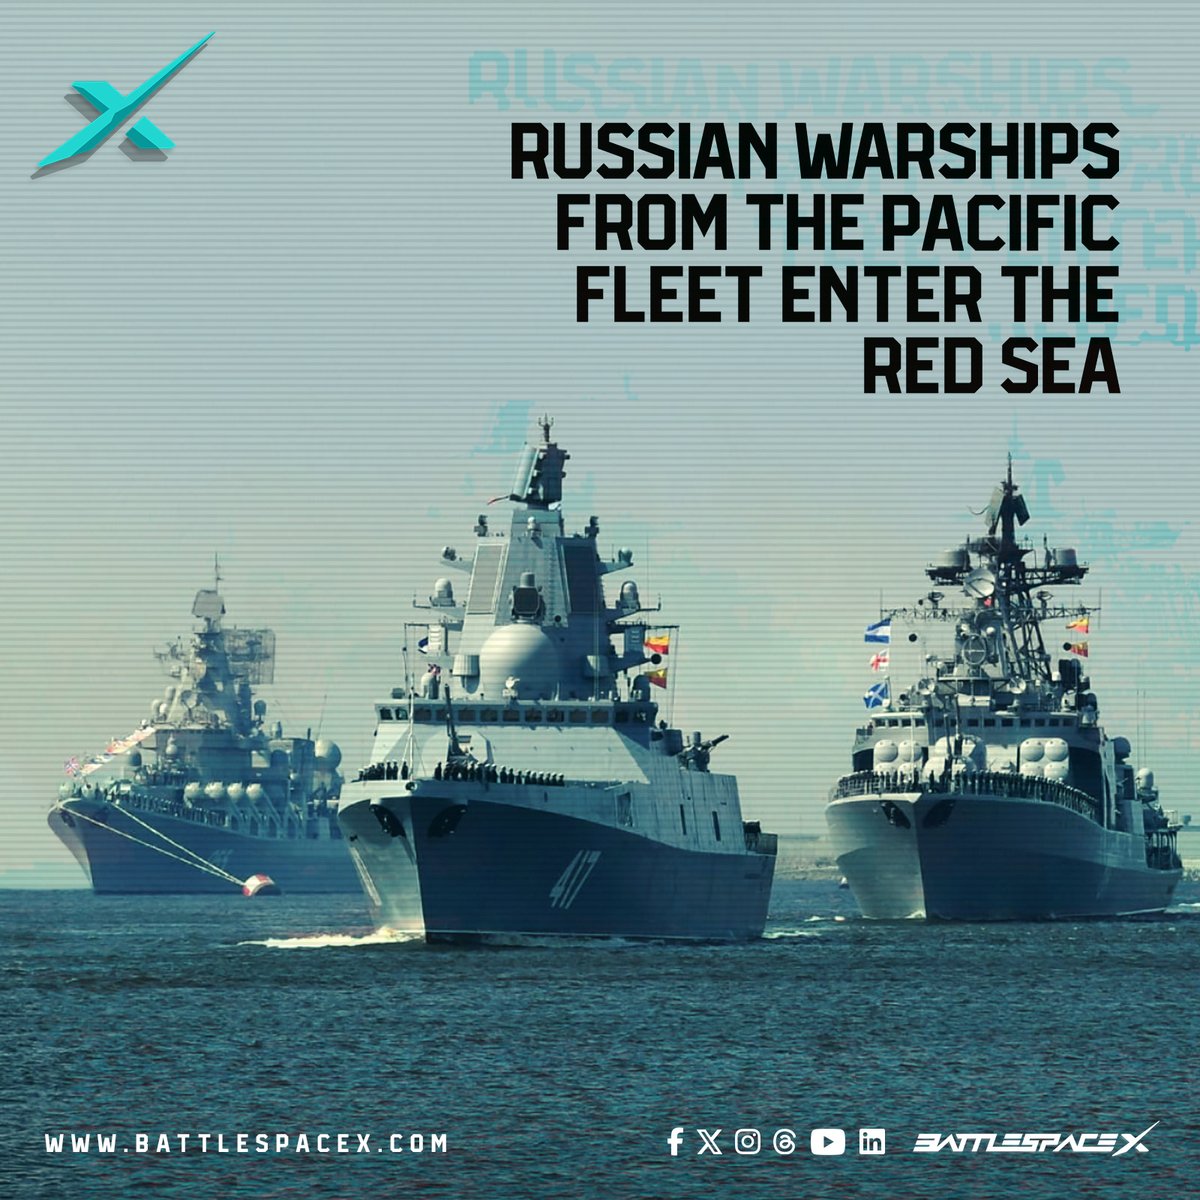 Russian Warships from the Pacific Fleet enter the Red Sea Amidst US, UK Naval presence targeting Houthi Positions in Yemen

#Battlespacex #russiannavy #USnavy #Britishnavy #frenchnavy #france #unitedstates #russia #redsea #navalwarfare #navalwarships #frigates #combatships…